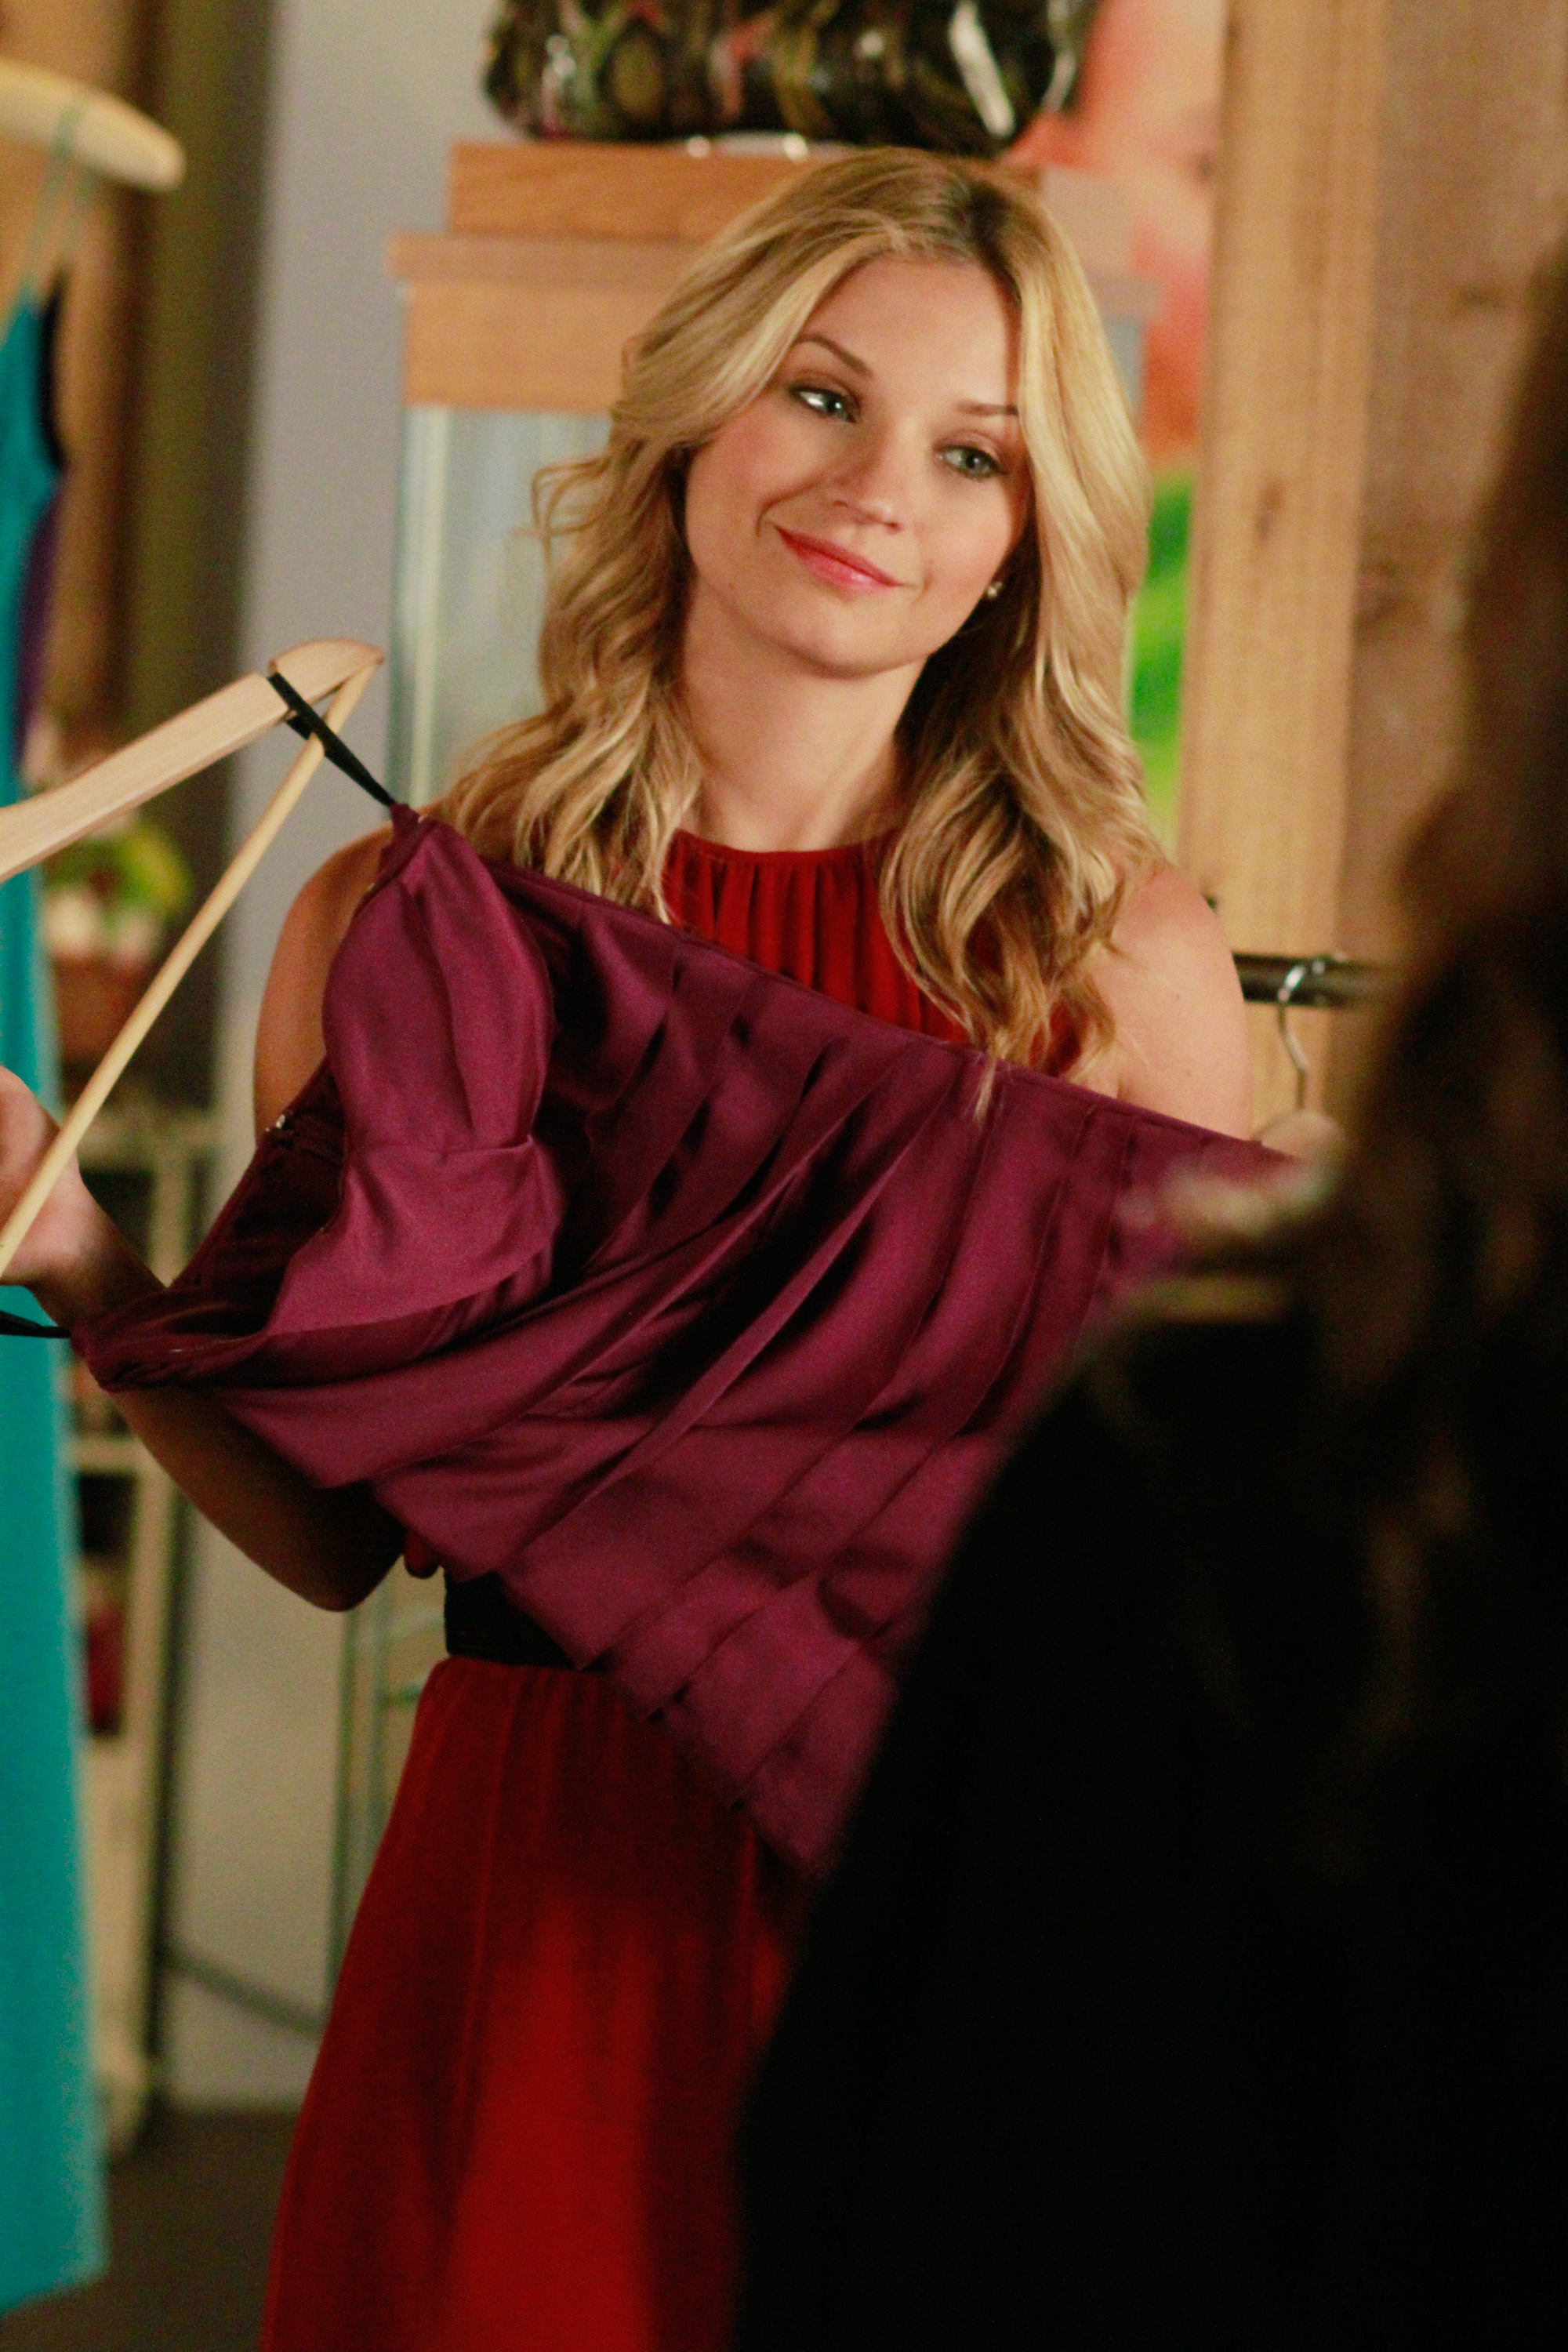 CeCe holding up a dress, smiling